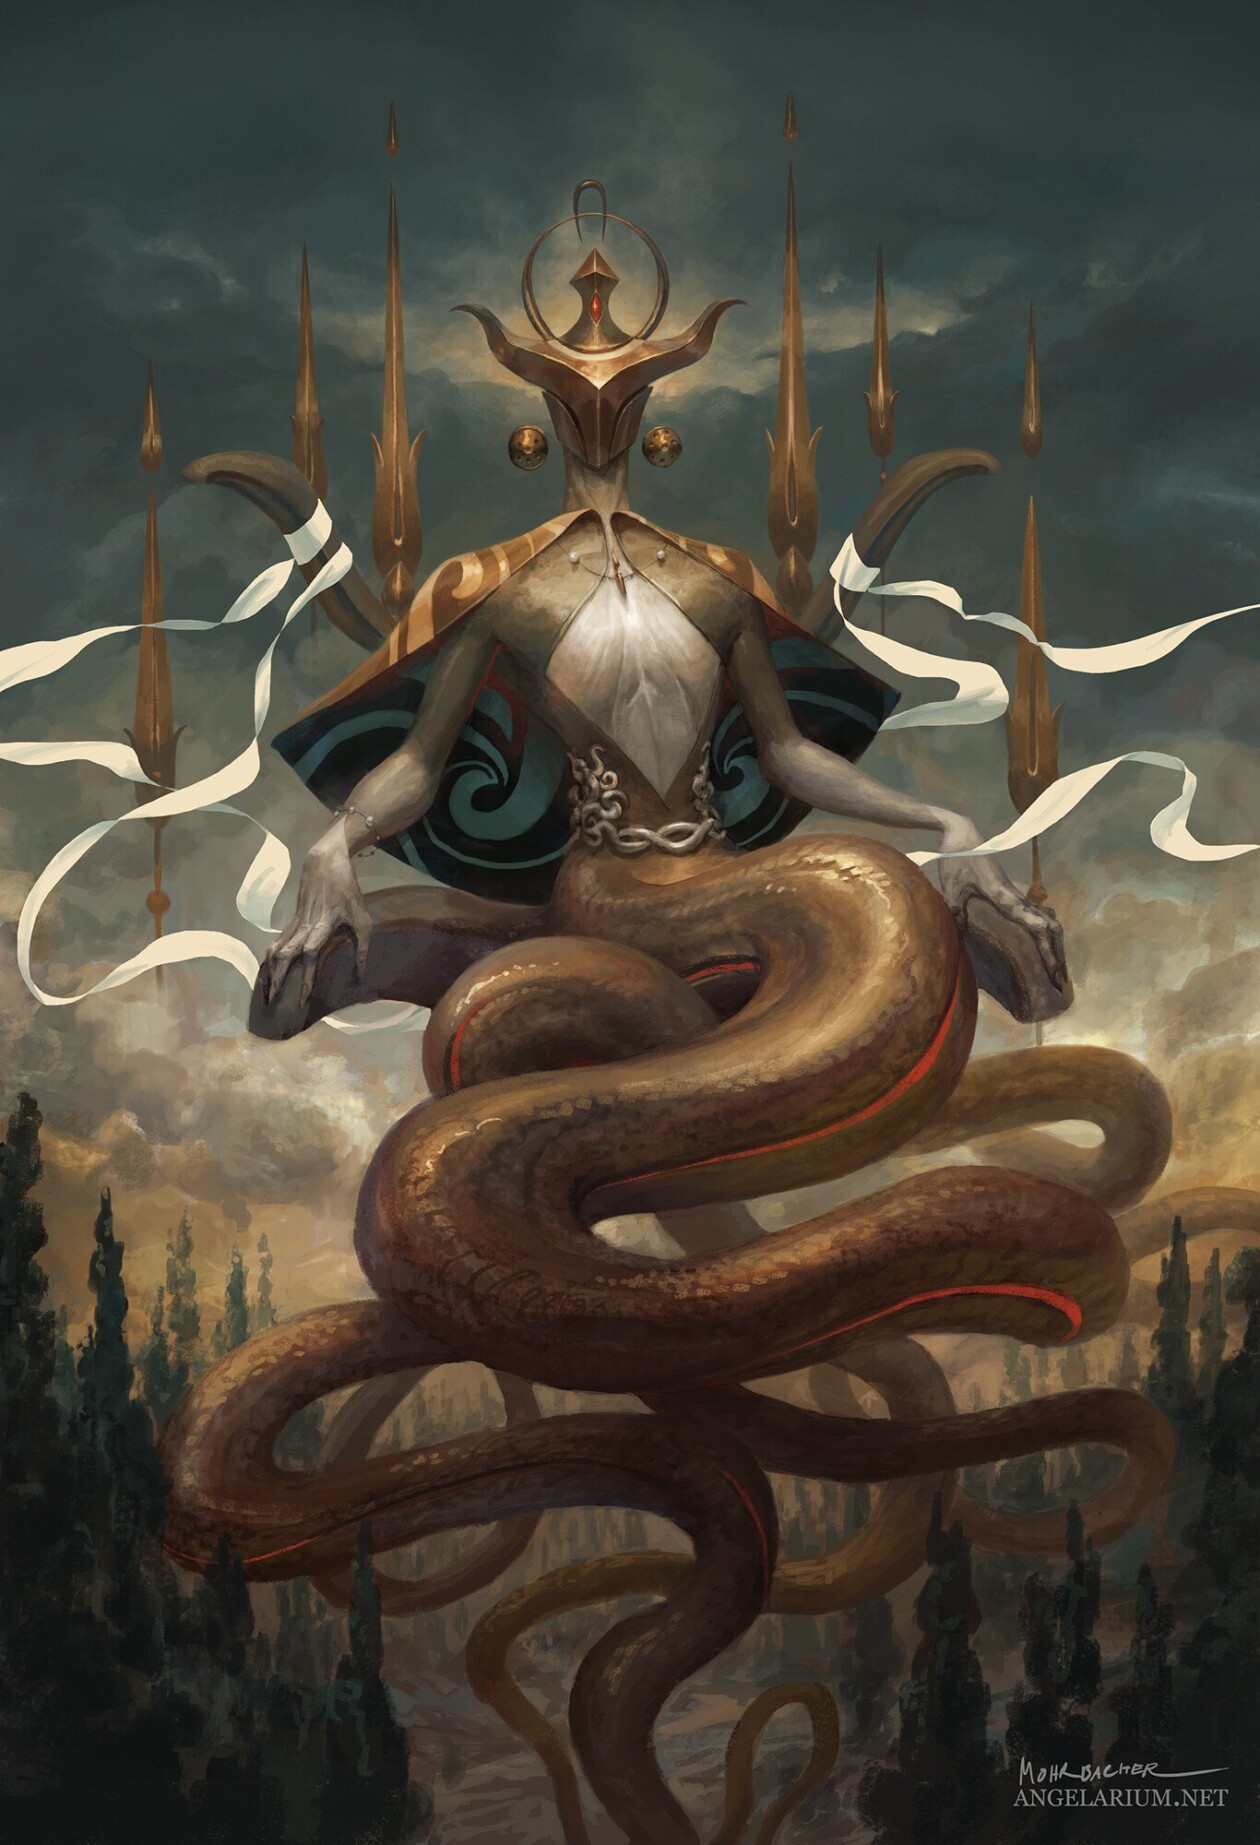 Peter Mohrbacher Blends Surrealism With Fantasy To Create Powerful Magical Beings (7)